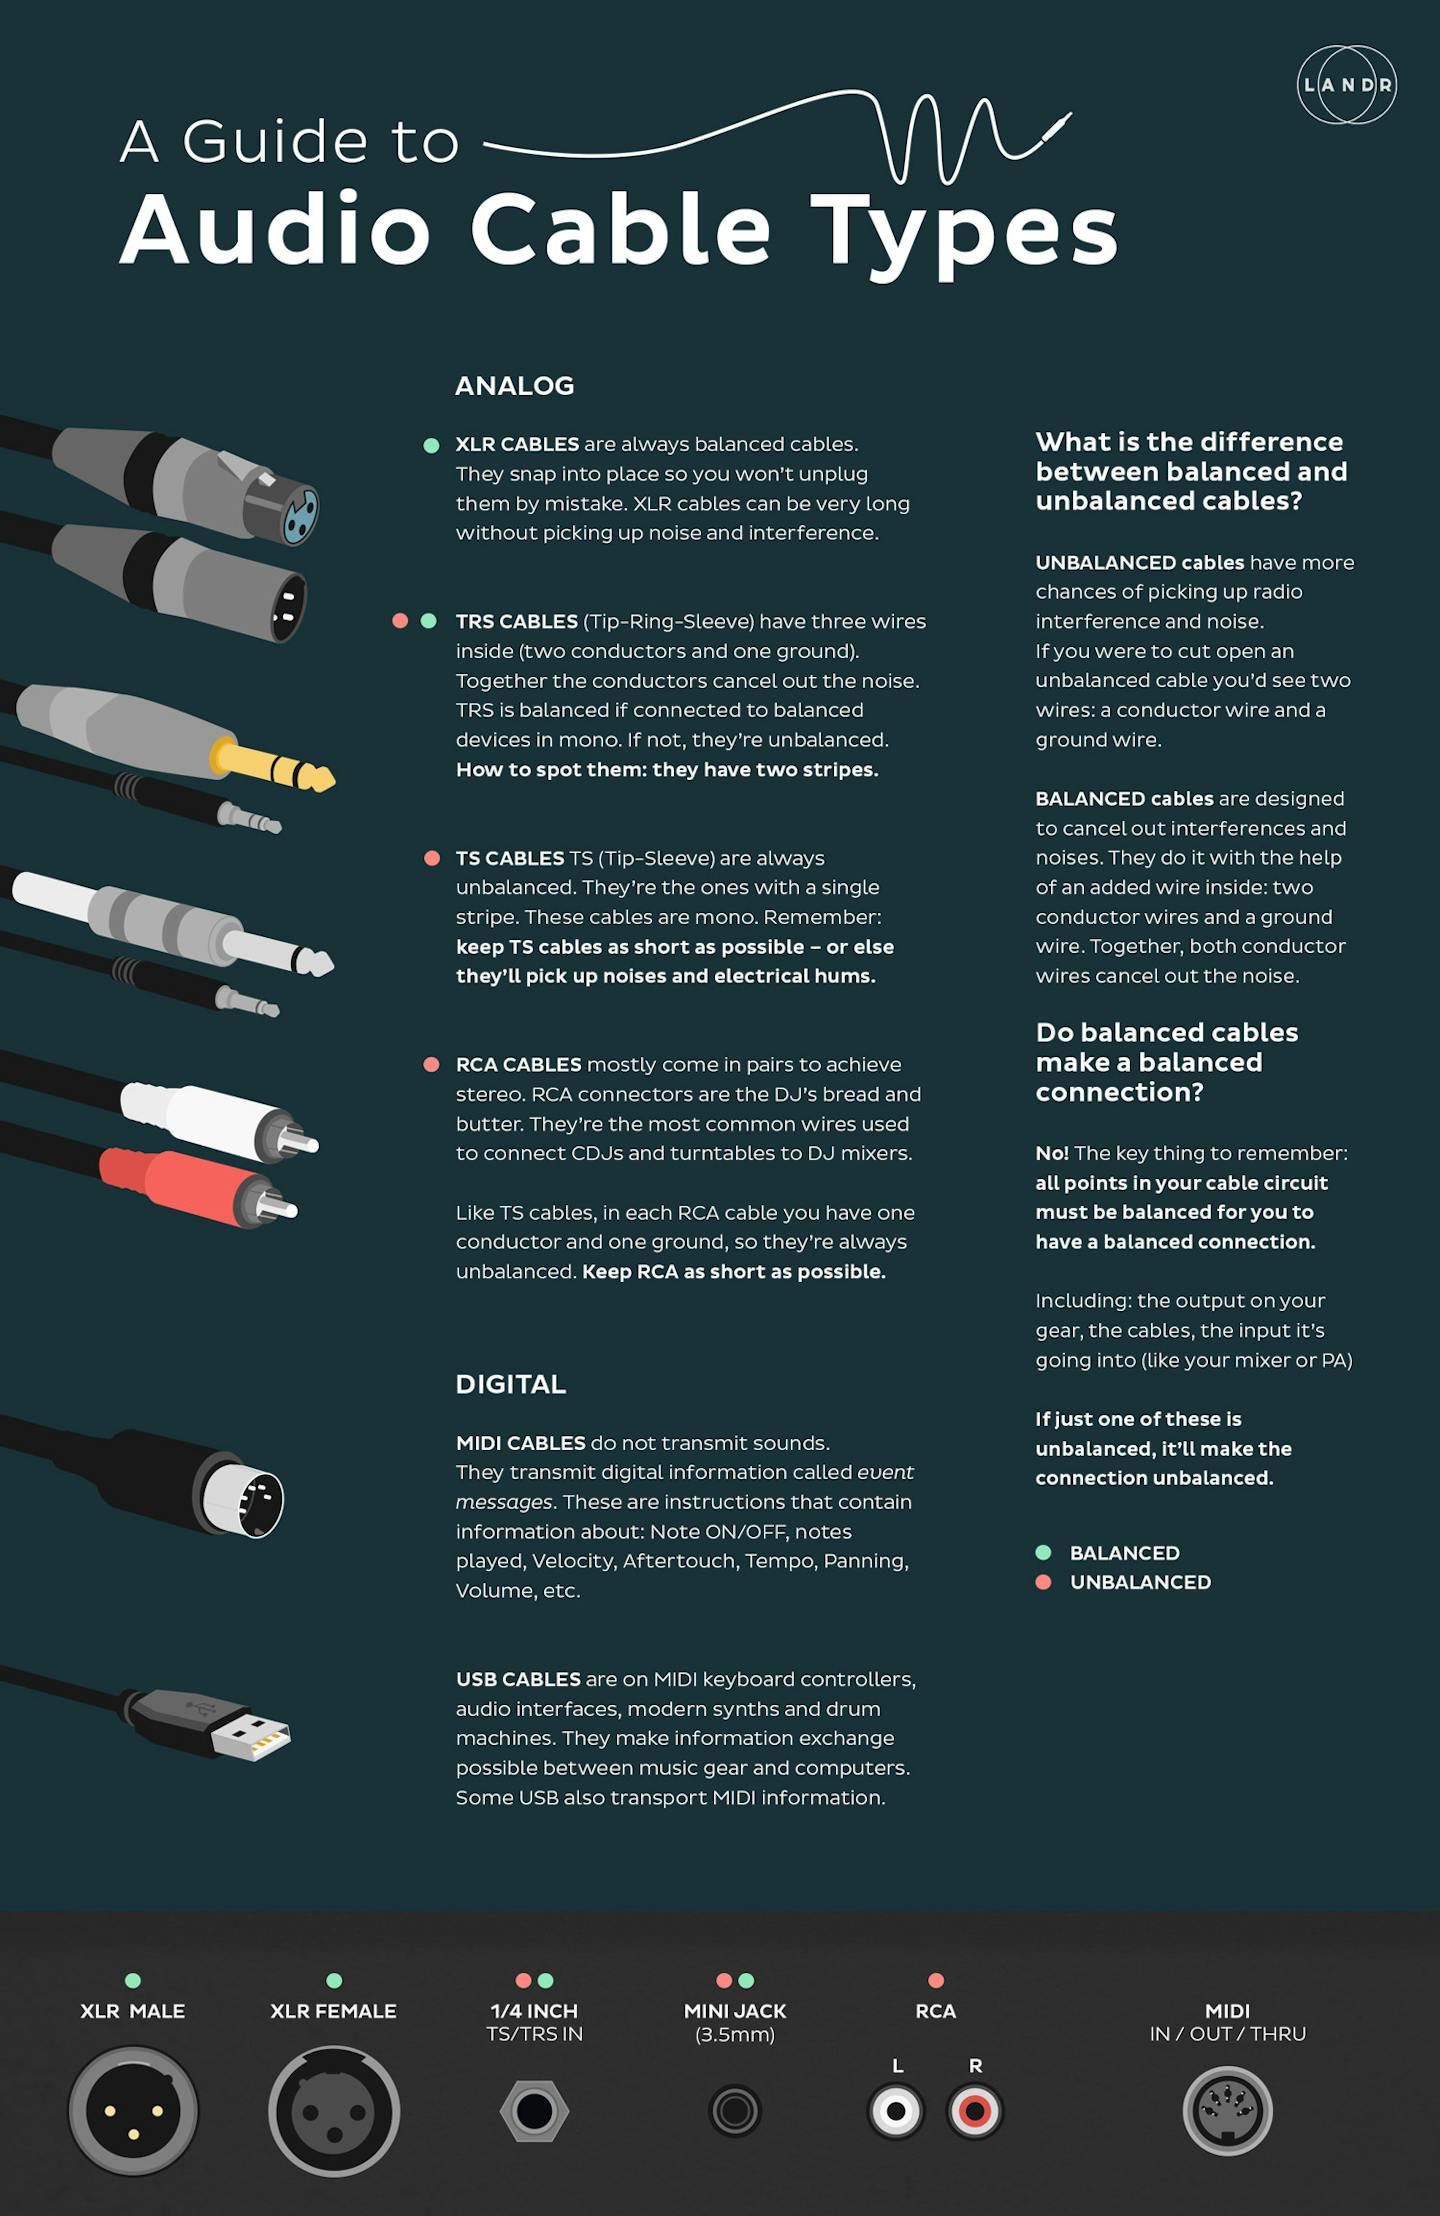 Read -<a href="https://blog.landr.com/audio-cable-types-guide-infographic/" target="_blank" rel="noopener">Audio Cables: Everything Musicians Need To Know About Audio Cable Types</a> 